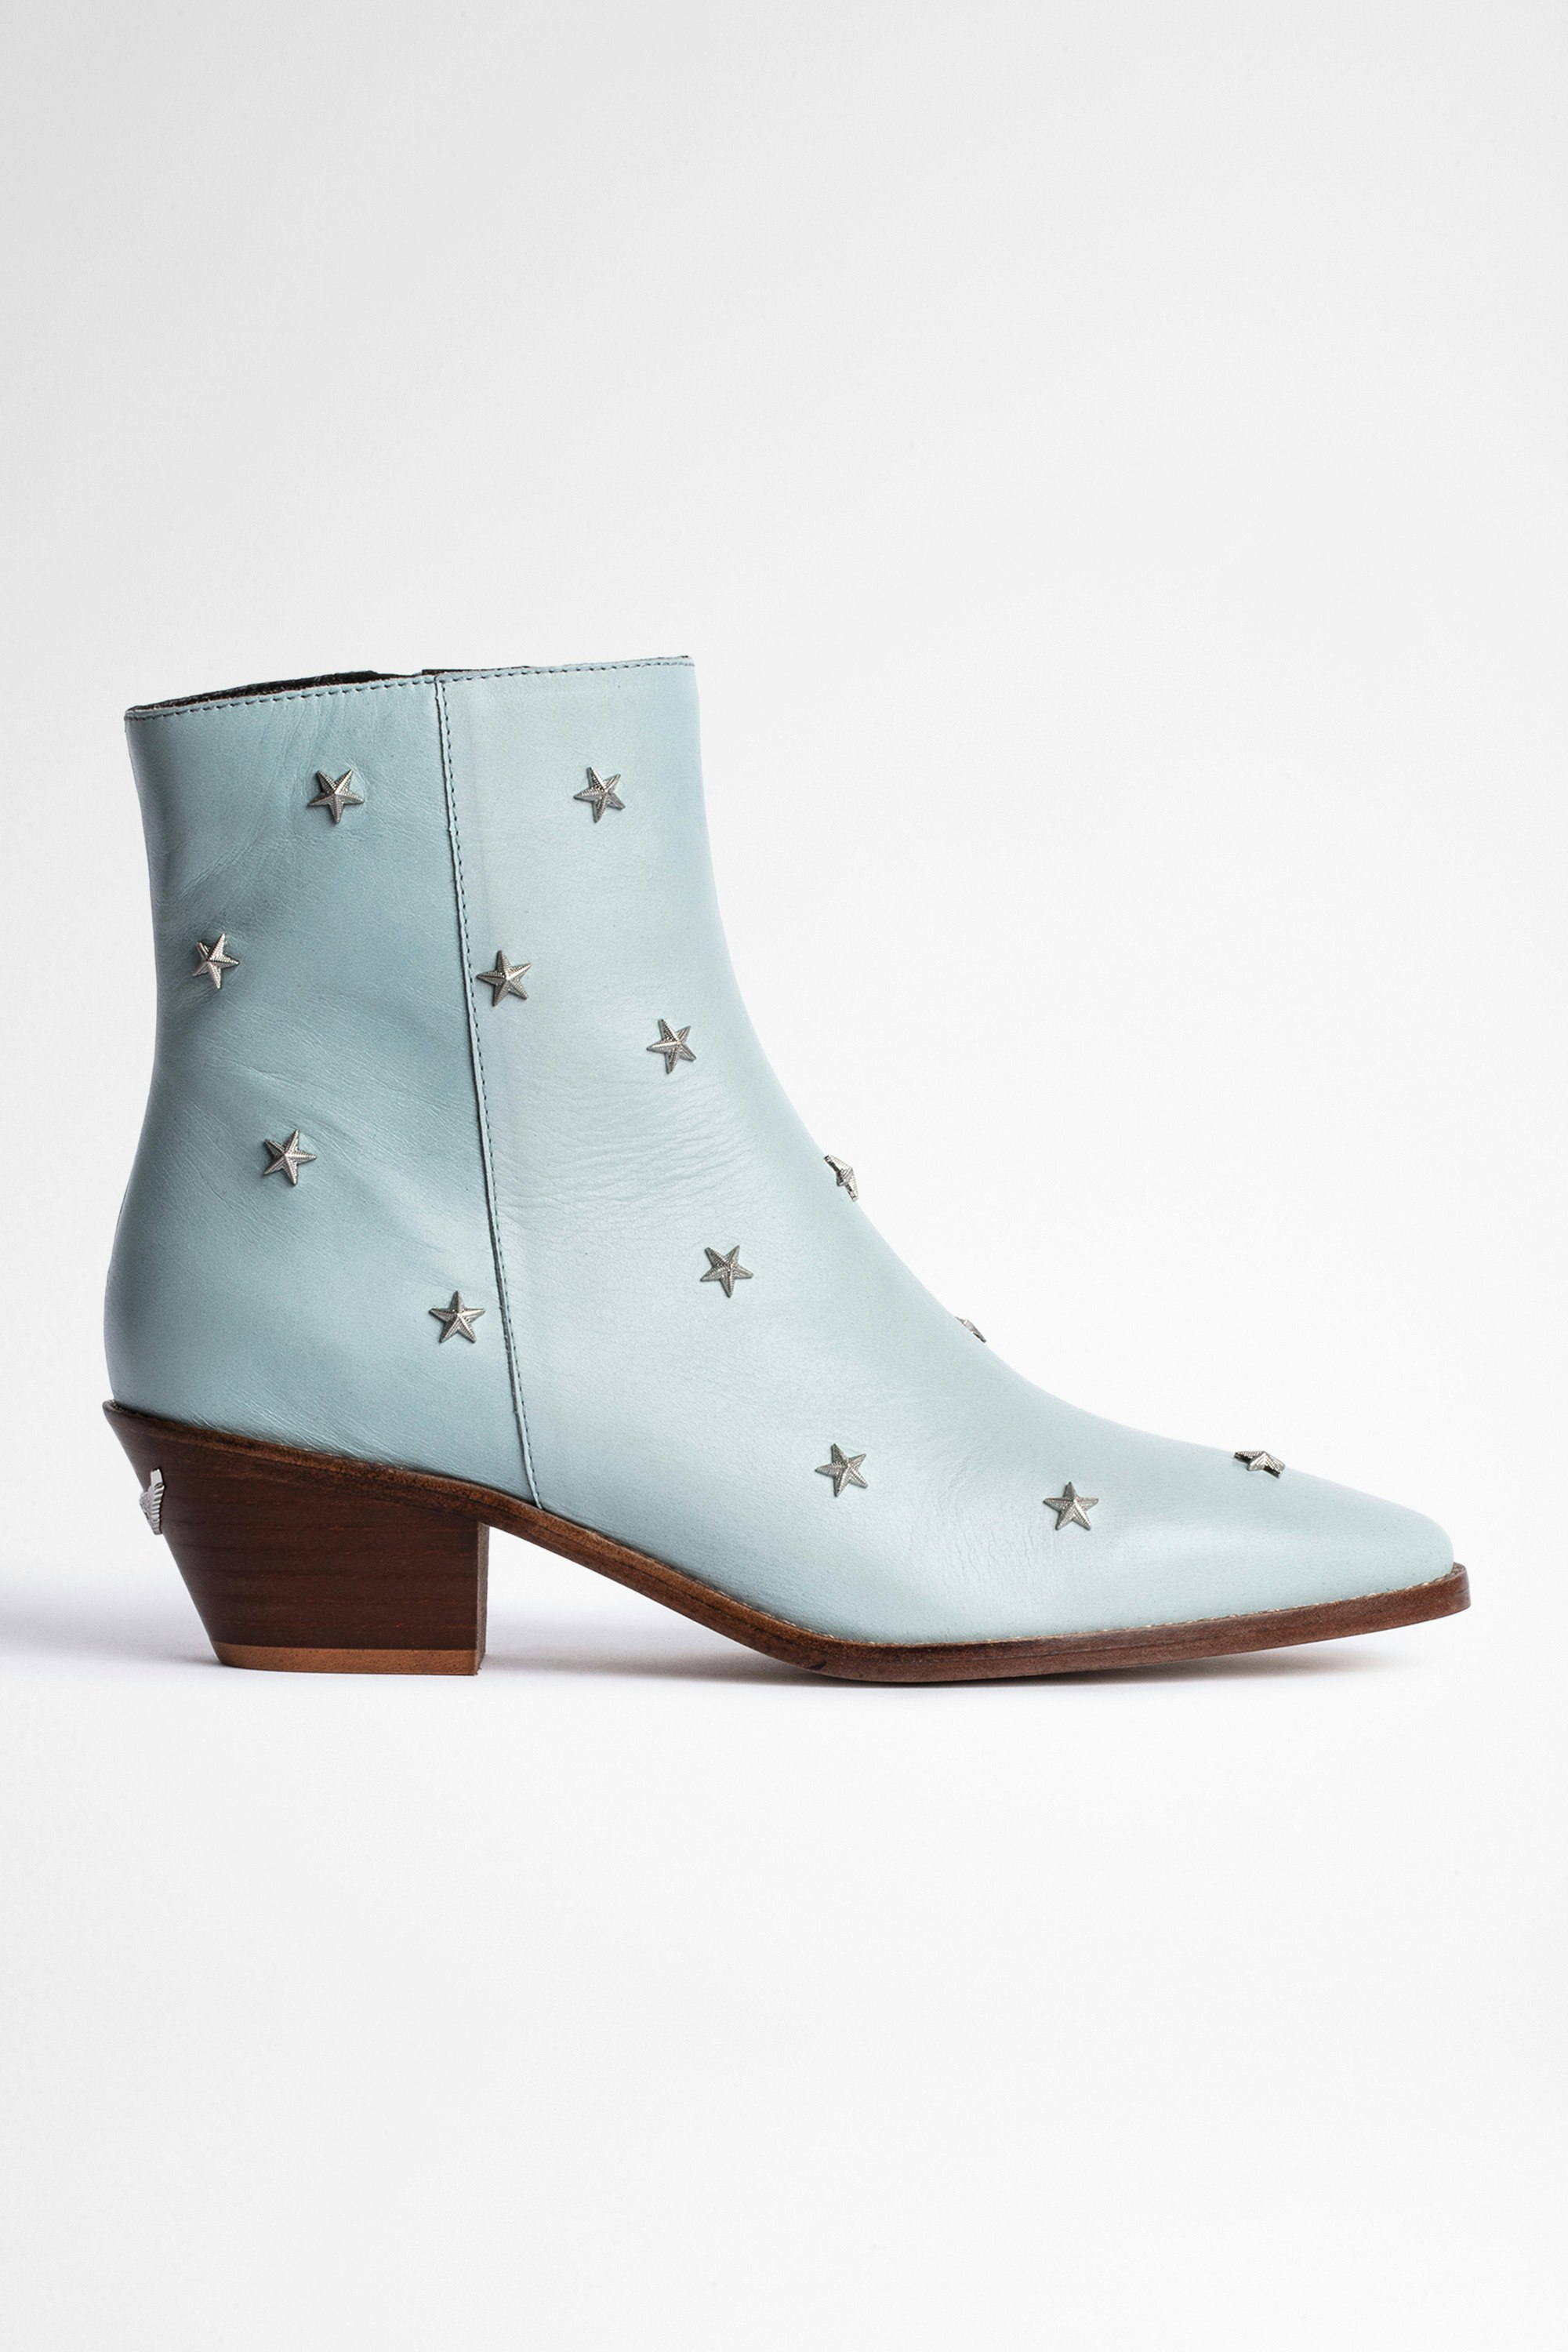 Tyler Boots Women’s sky blue leather ankle boots with star studs